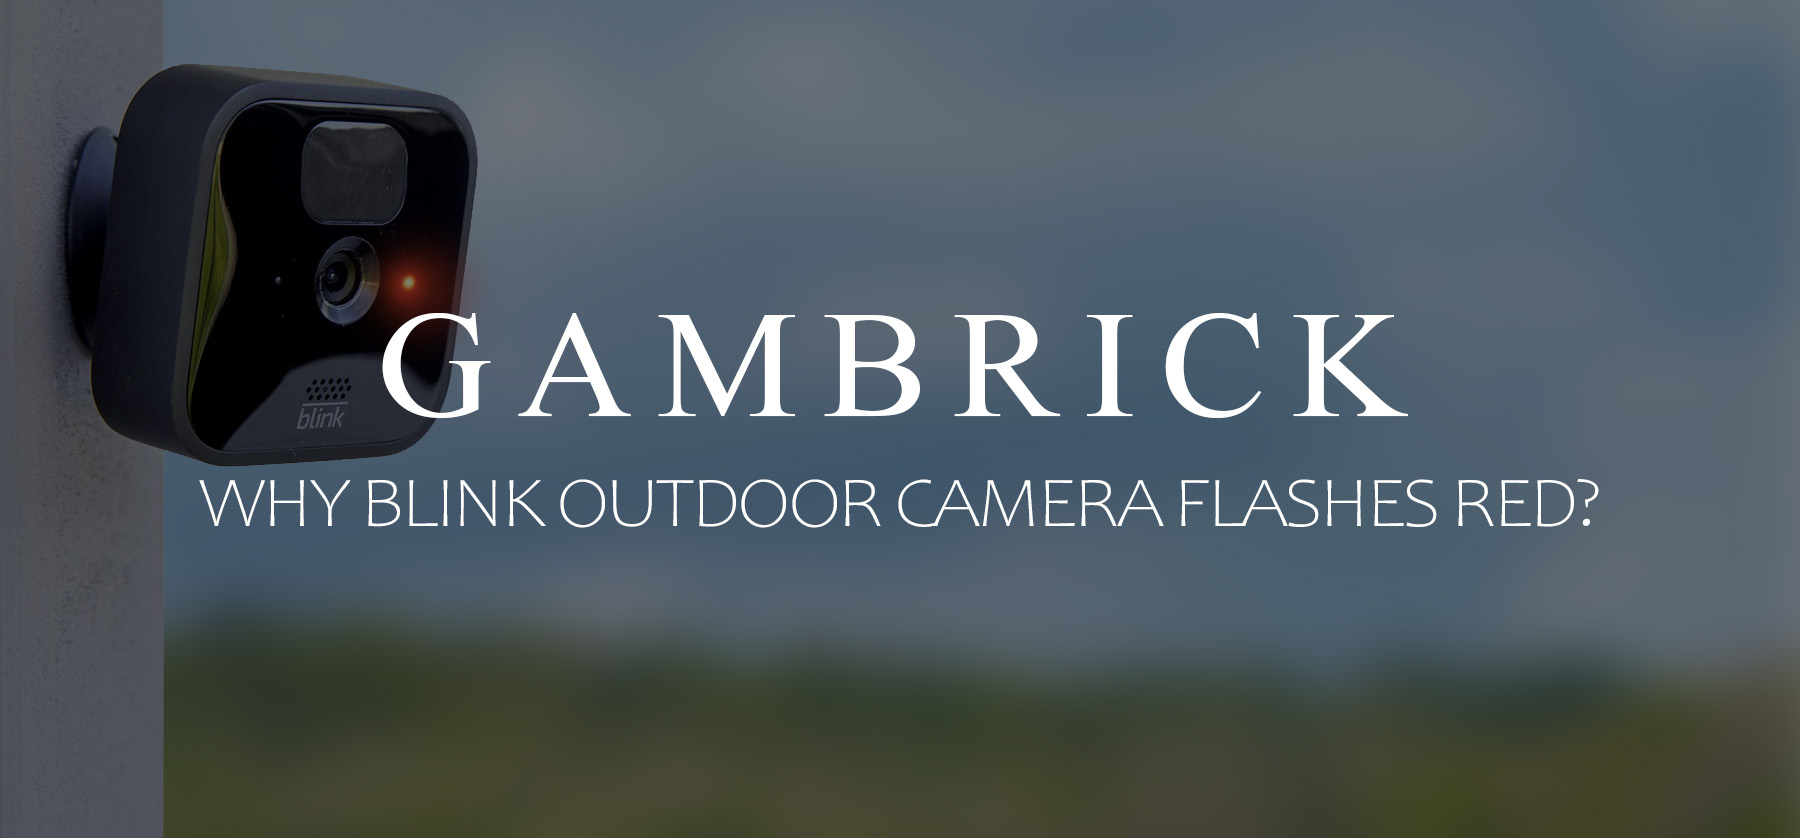 why Blink Outdoor camera flashes red banner 1.1